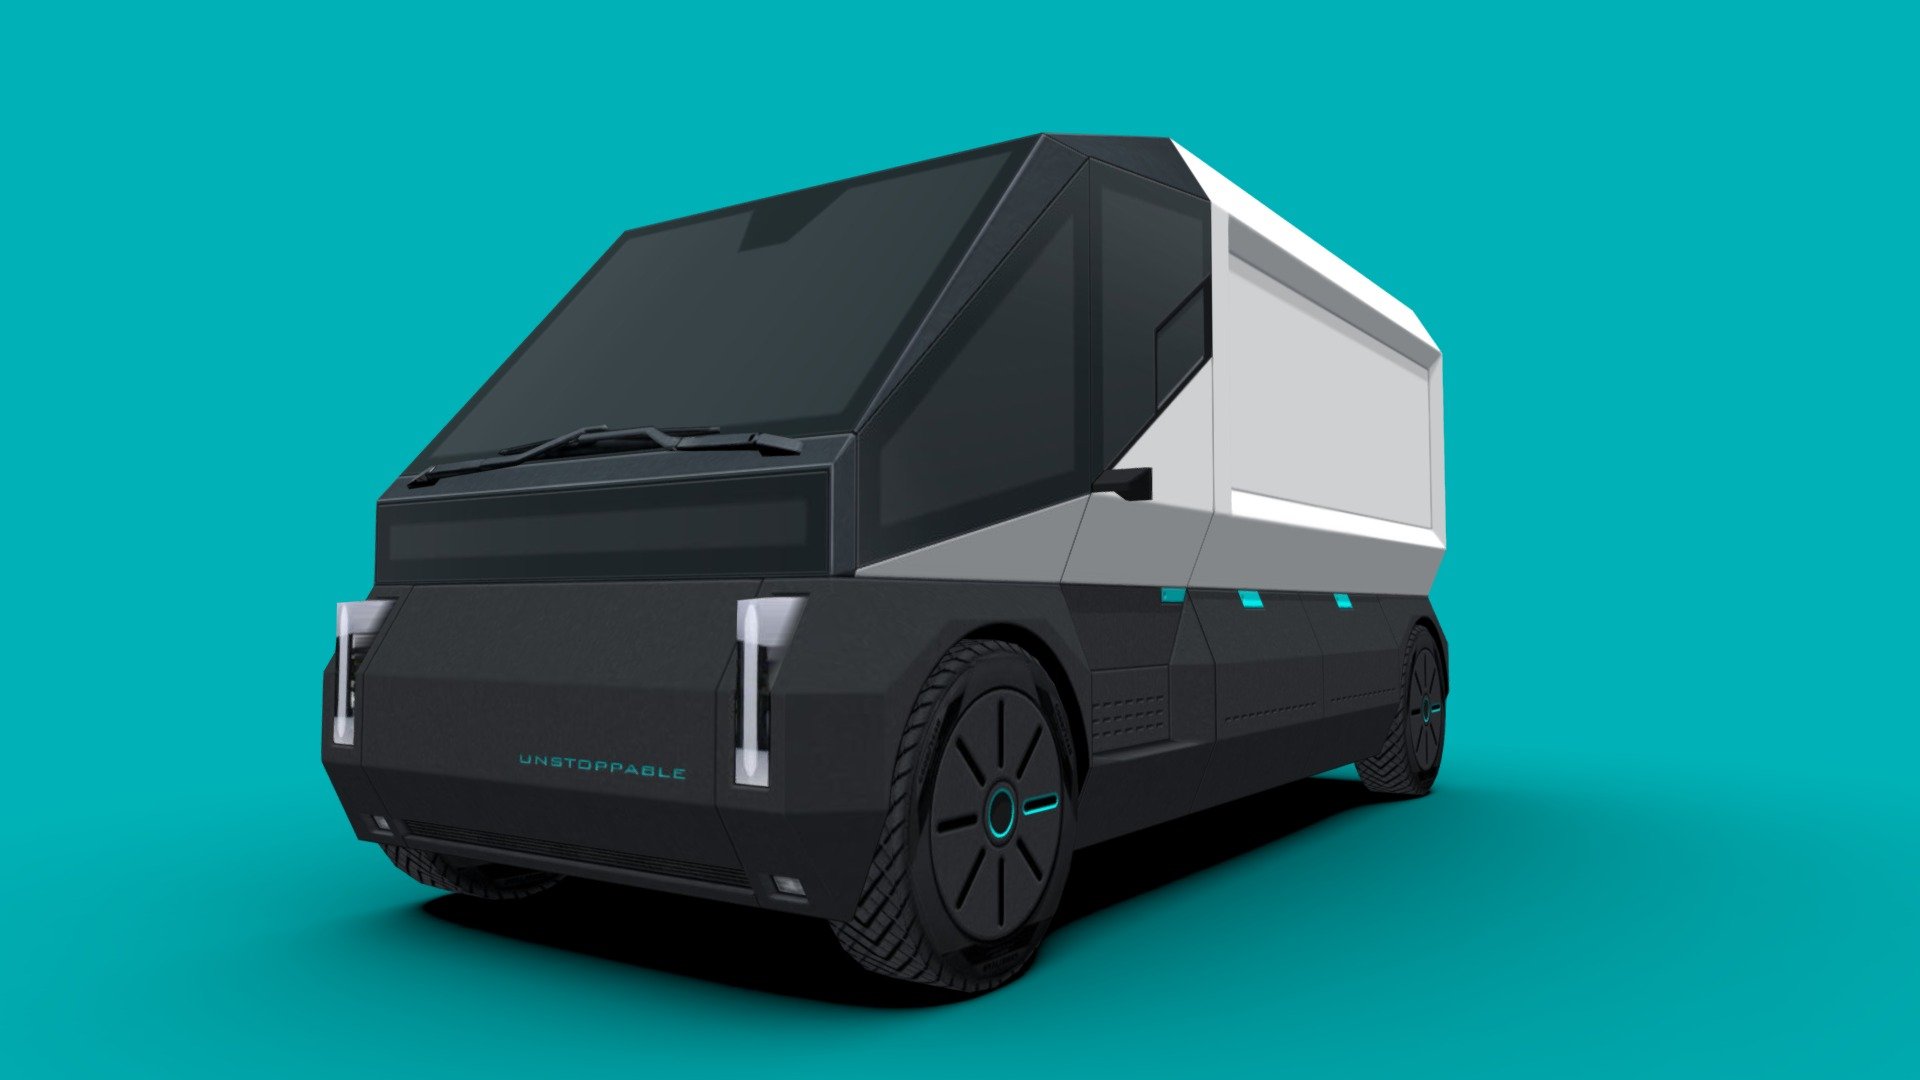 3d model of a generic battery electric cargo van, delivery van, or step-van

A free interpretation of what a delivery van could be, with a futuristic appearance but with very simple lines.

It can be easily personalized by adding a logo or graphic to the texture of the side panel.

The model is very low-poly, full-scale, real photos texture (single 2048 x 2048 png).

Package includes 5 file formats and texture (3ds, fbx, dae, obj and skp)

Hope you enjoy it.

José Bronze - Generic electric van - Buy Royalty Free 3D model by Jose Bronze (@pinceladas3d) 3d model